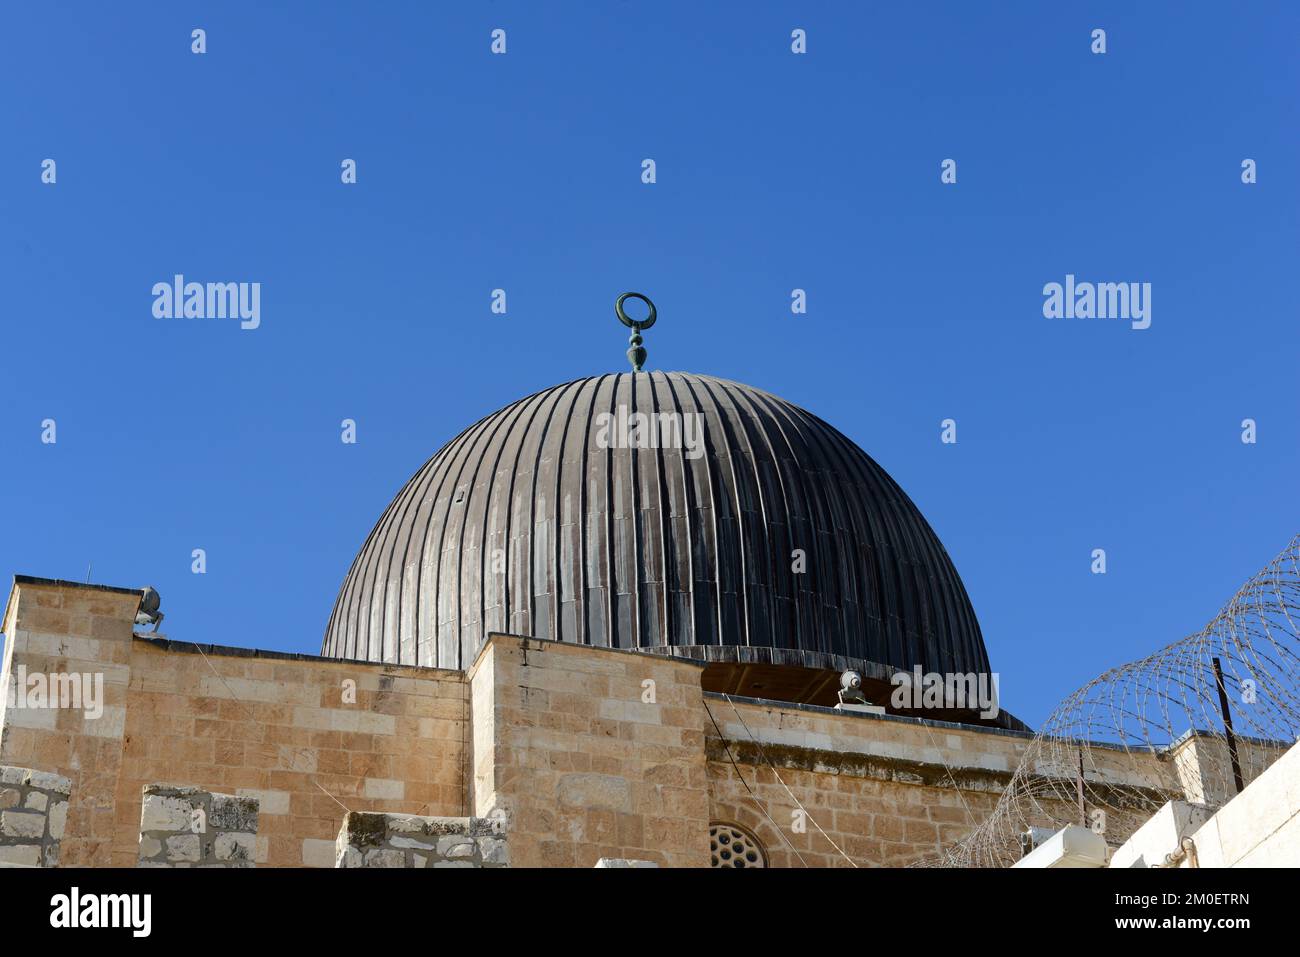 Al-Aqsa mosque in the old city of Jerusalem. Stock Photo